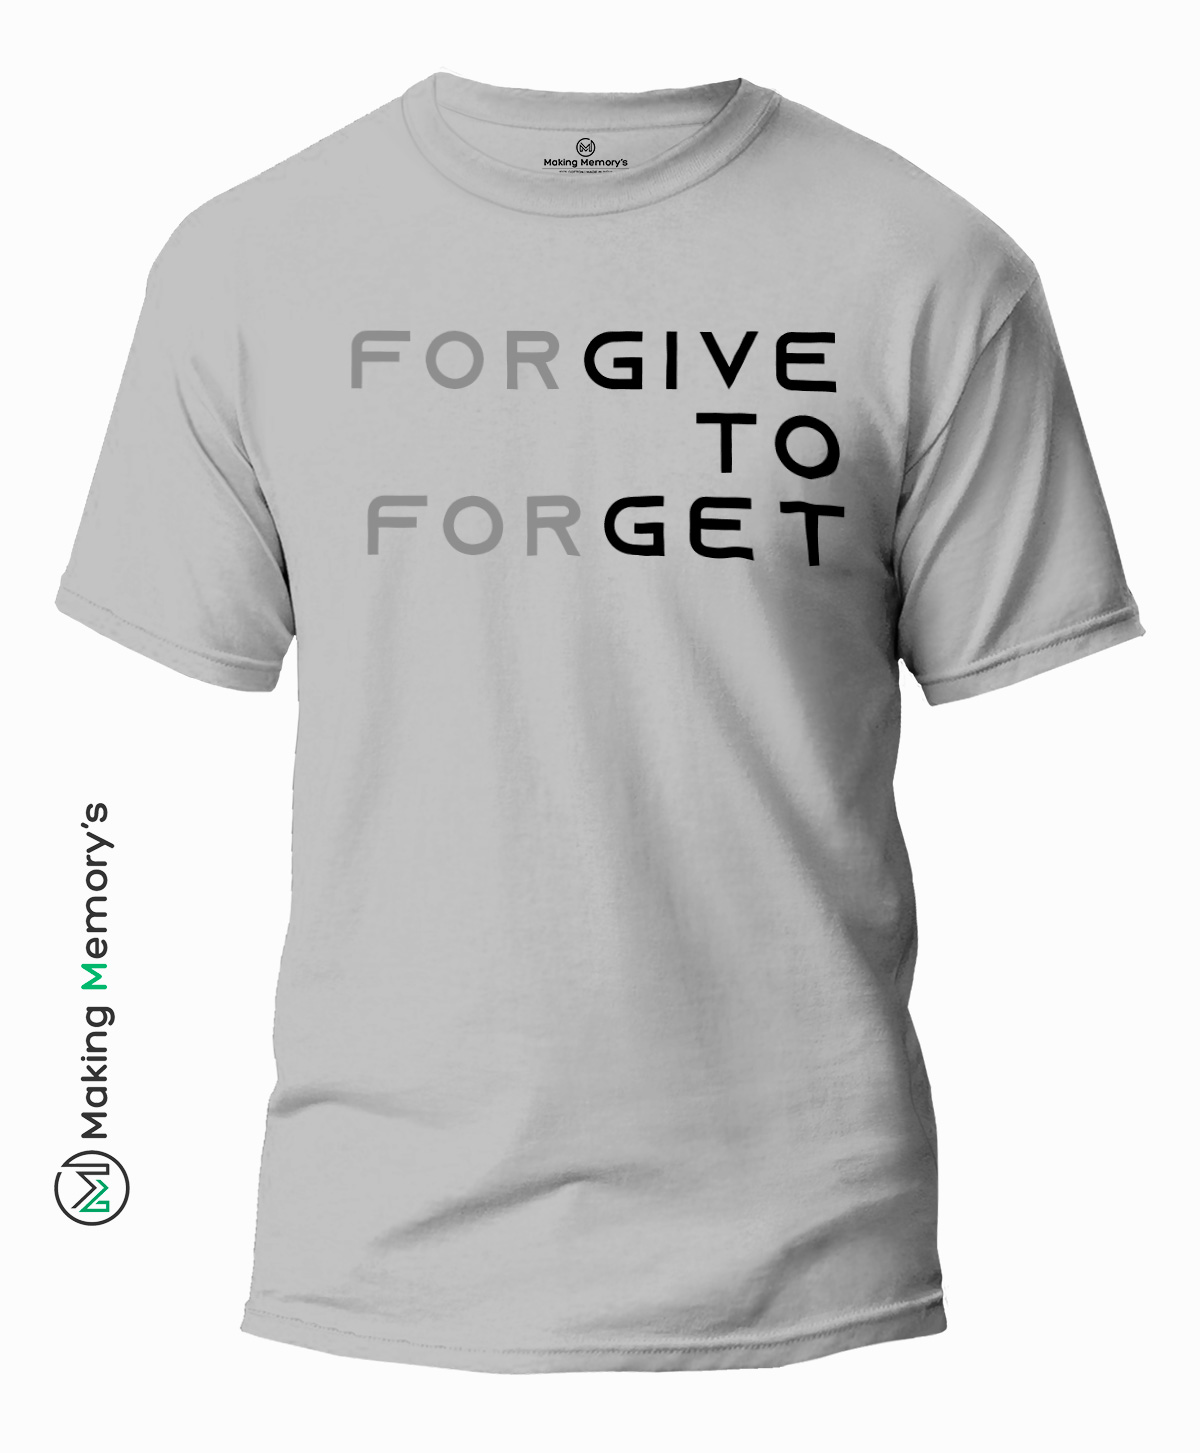 Forgive-to-Forget-Gray-T-Shirt